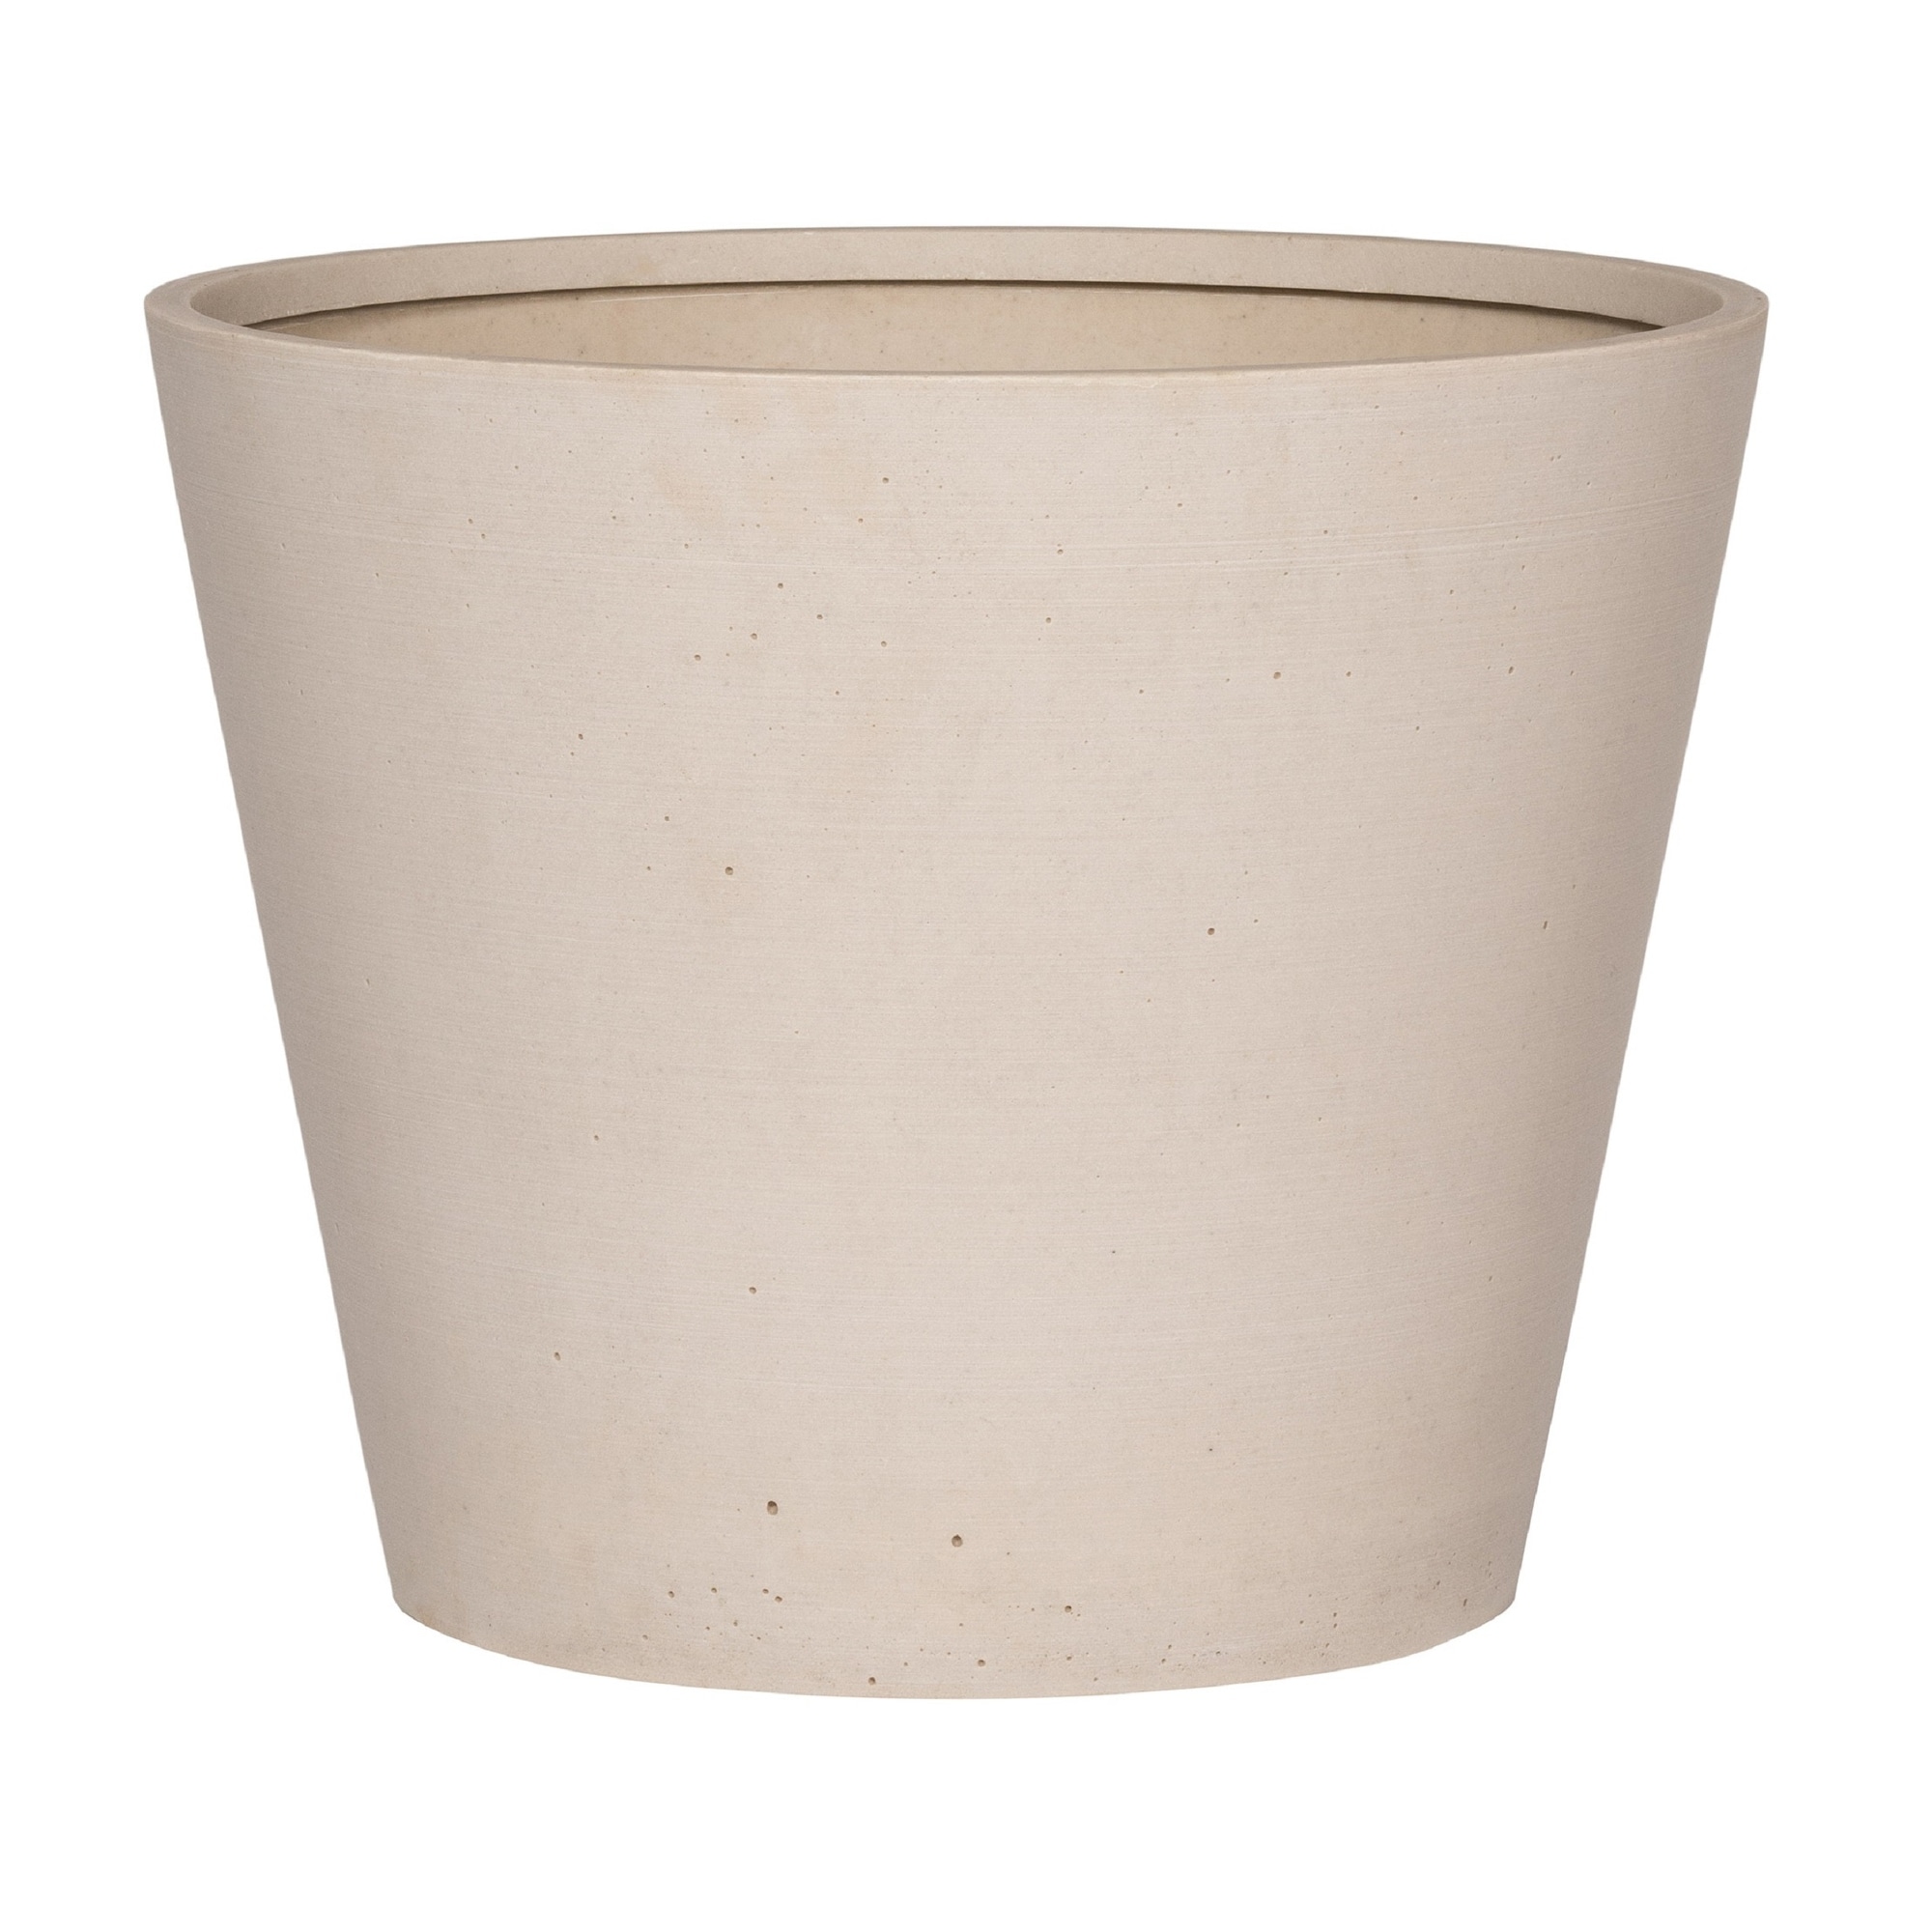 Pottery Pots Bucket Small Sandstone Indoor Outdoor Modern Thin Planter,  15.8 Inch Tall On Sale Bed Bath  Beyond 32759279